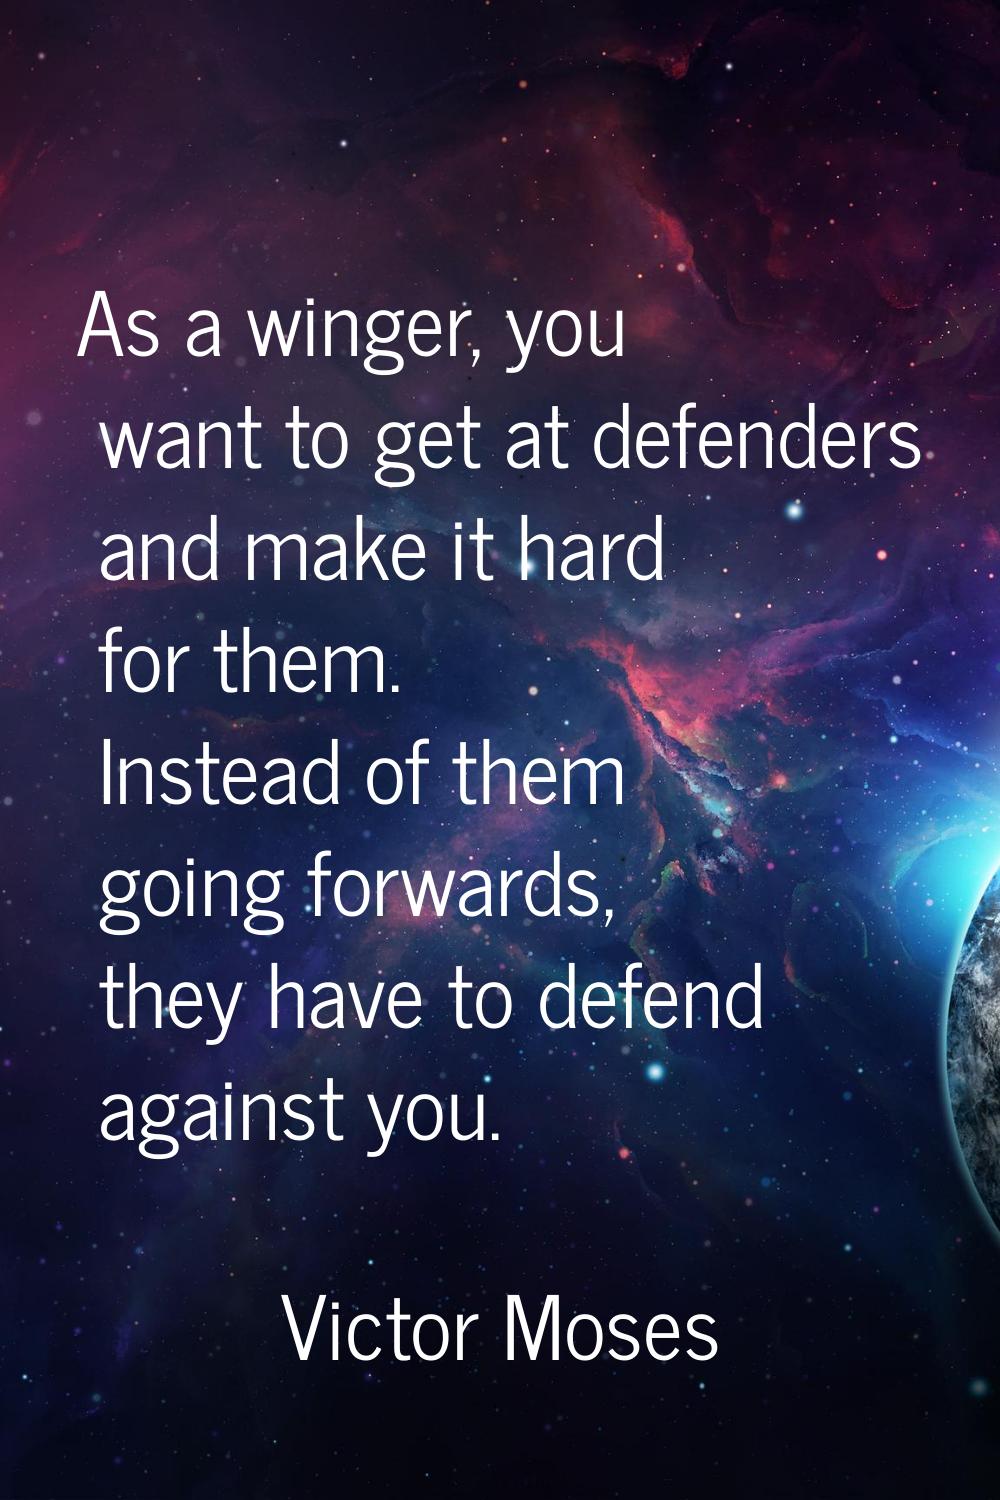 As a winger, you want to get at defenders and make it hard for them. Instead of them going forwards